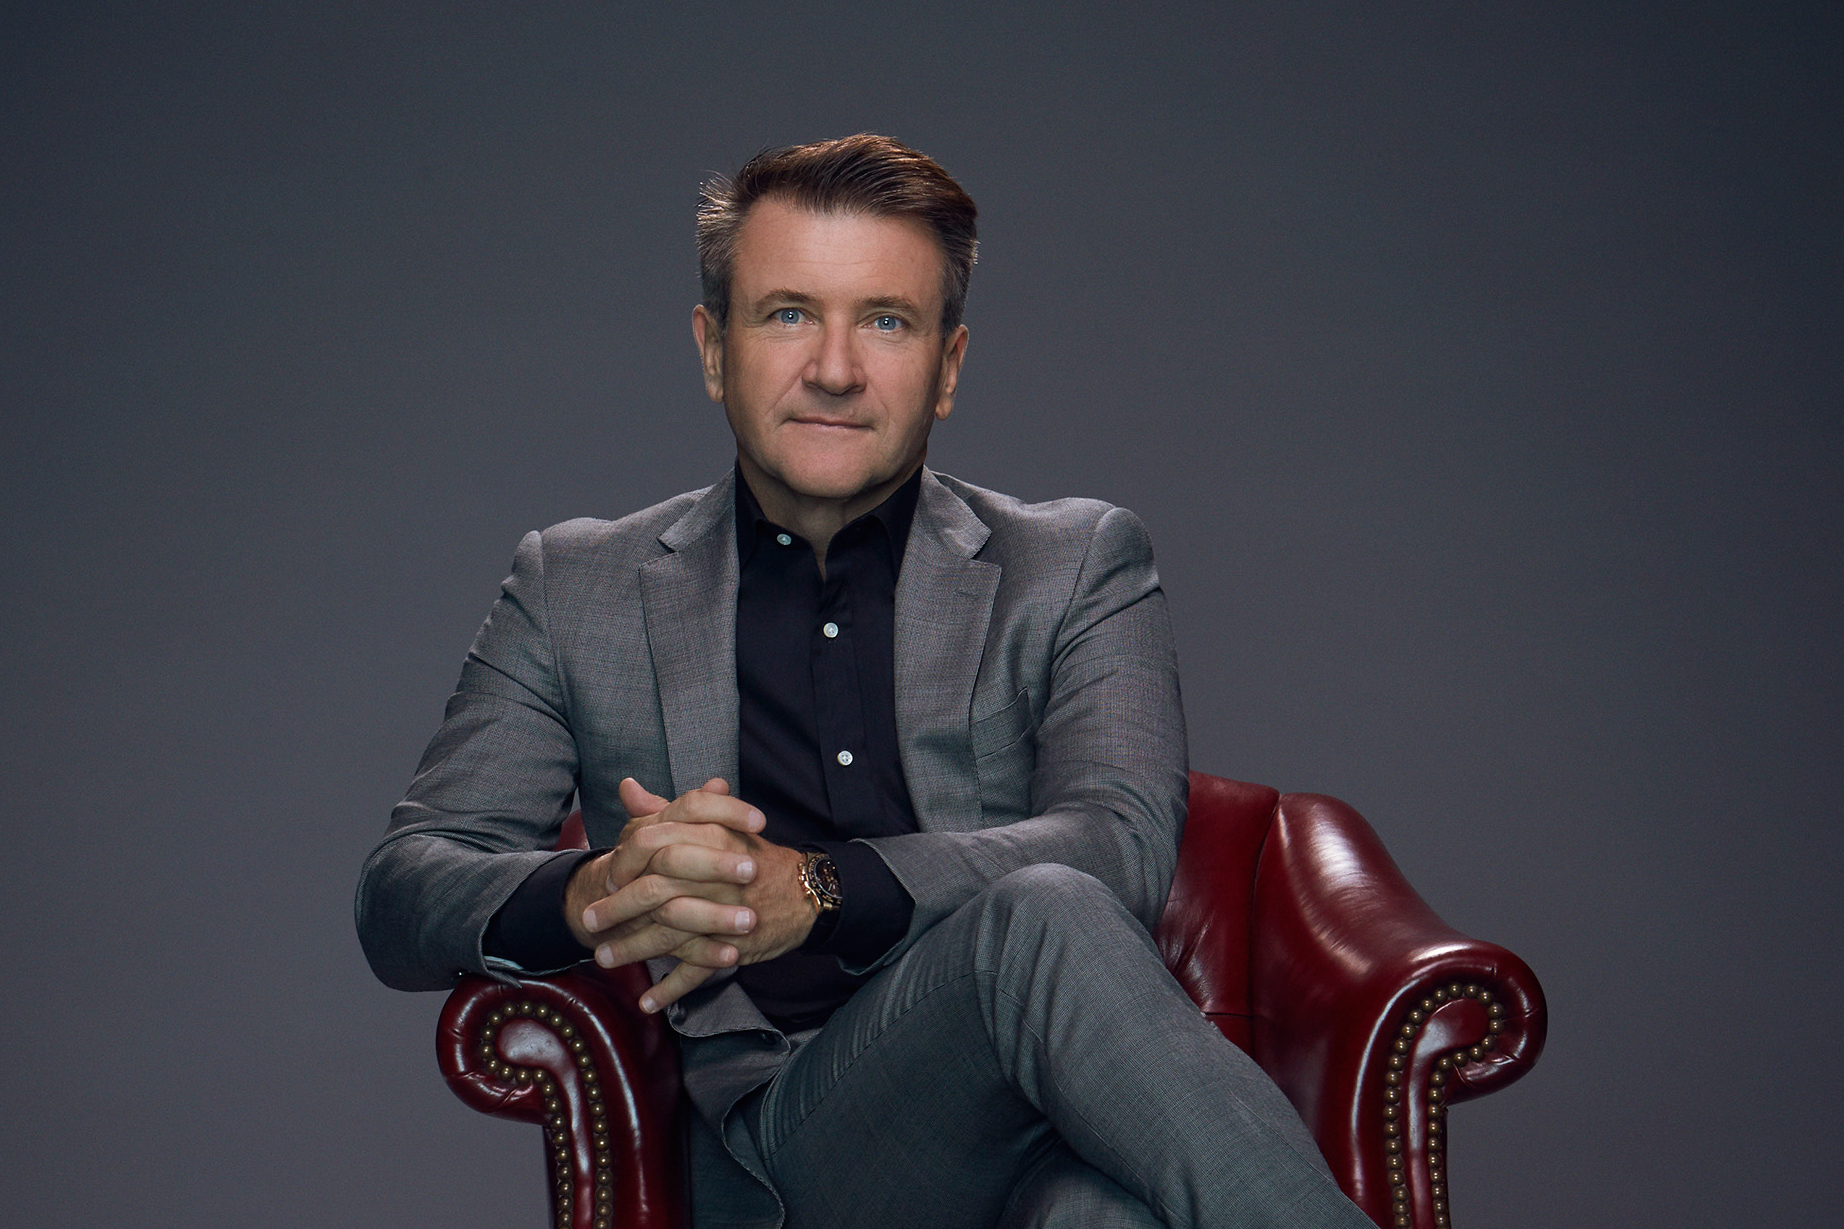 'Shark Tank' Investor Robert Herjavec Has a Bold Prediction for the Future of Cryptocurrency